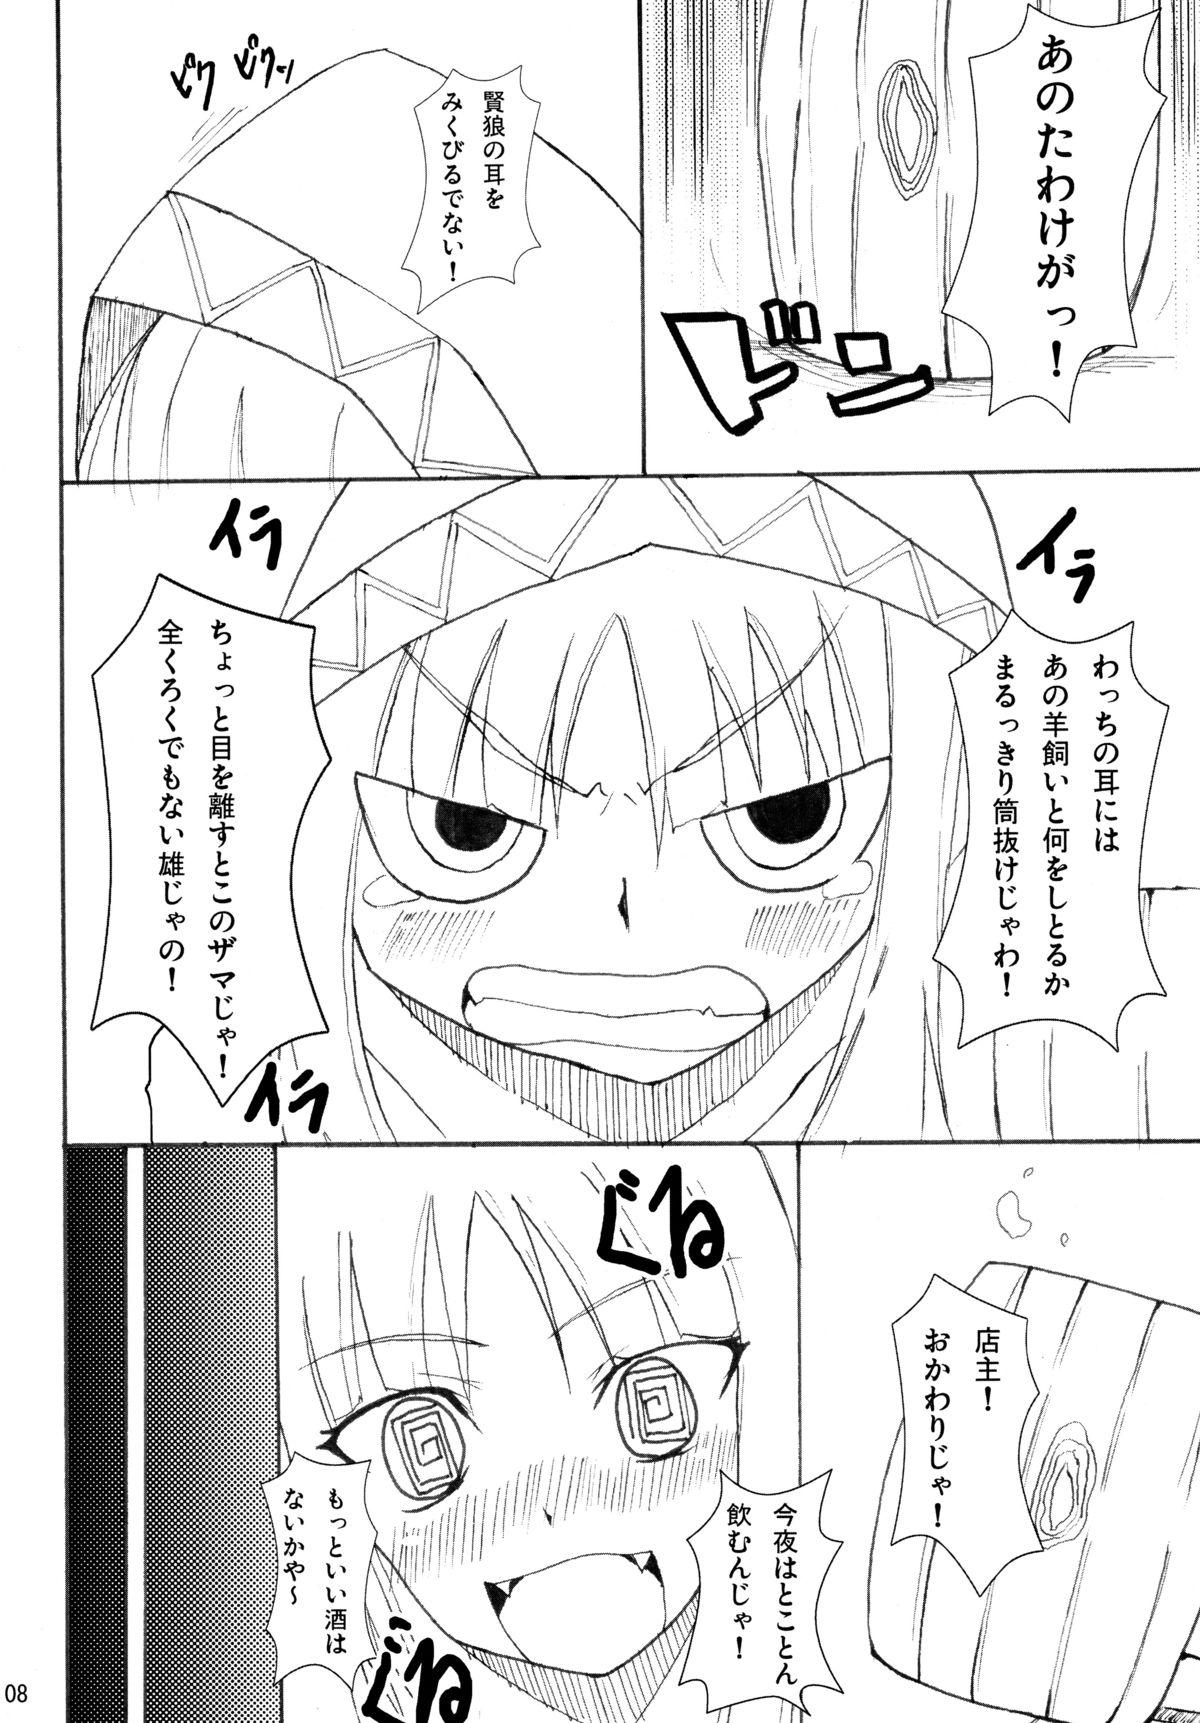 Strip Naked Spice - Spice and wolf 18yearsold - Page 8